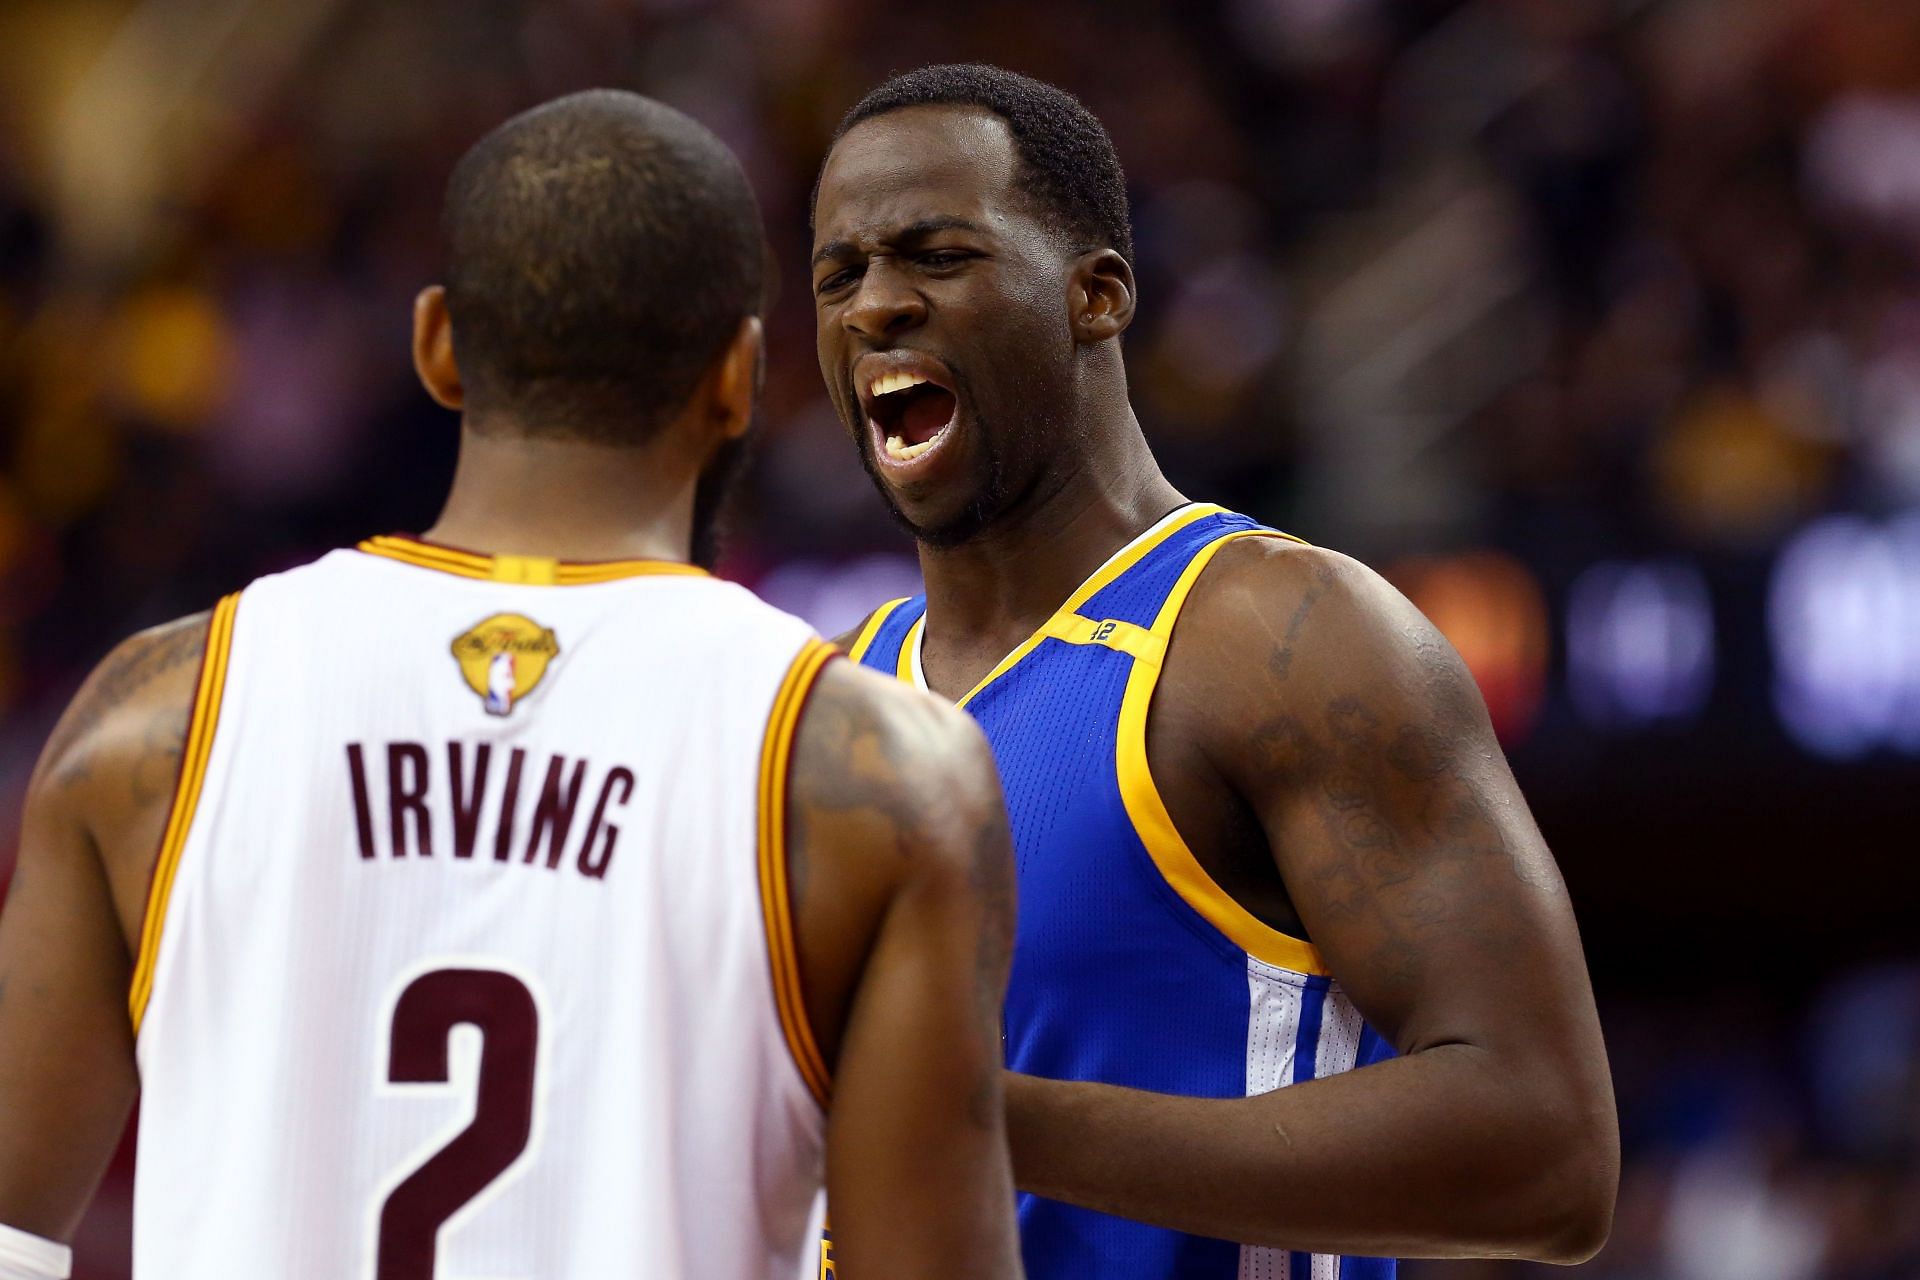 Draymond Green of the Golden State Warriors against Kyrie Irving during the 2017 NBA Finals